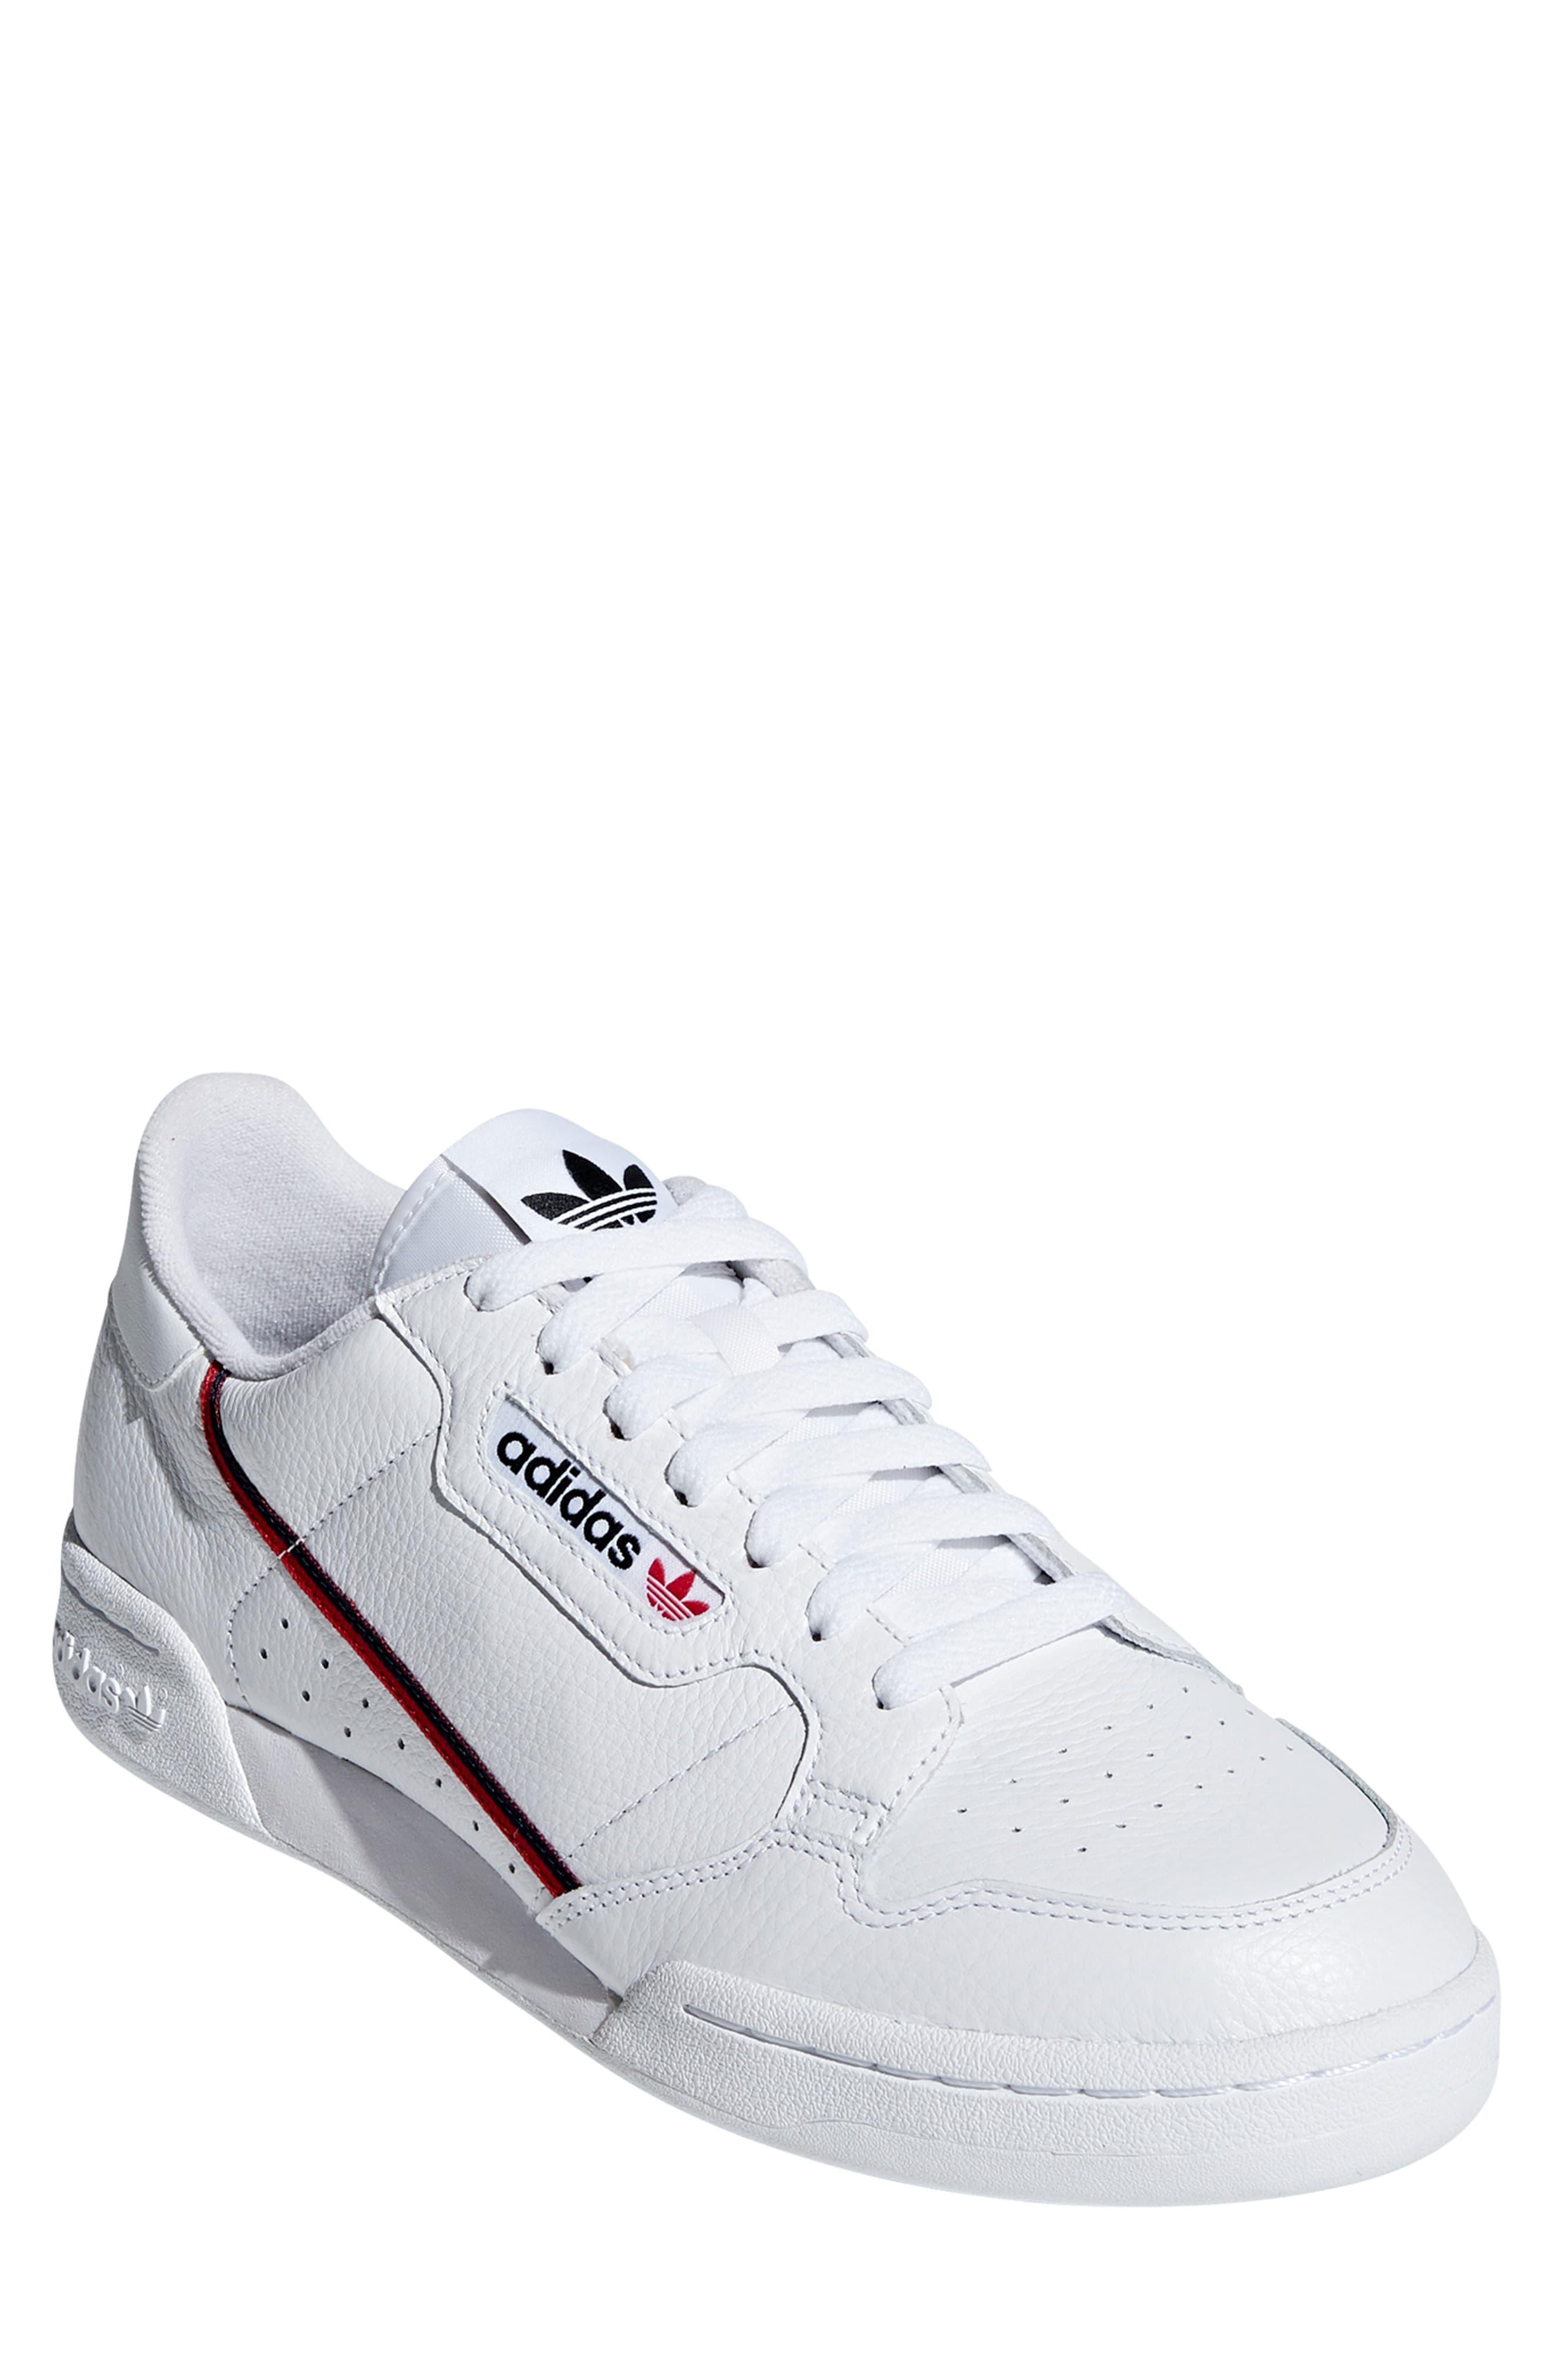 adidas Continental 80s Trainers in White for Men - Save 46% - Lyst